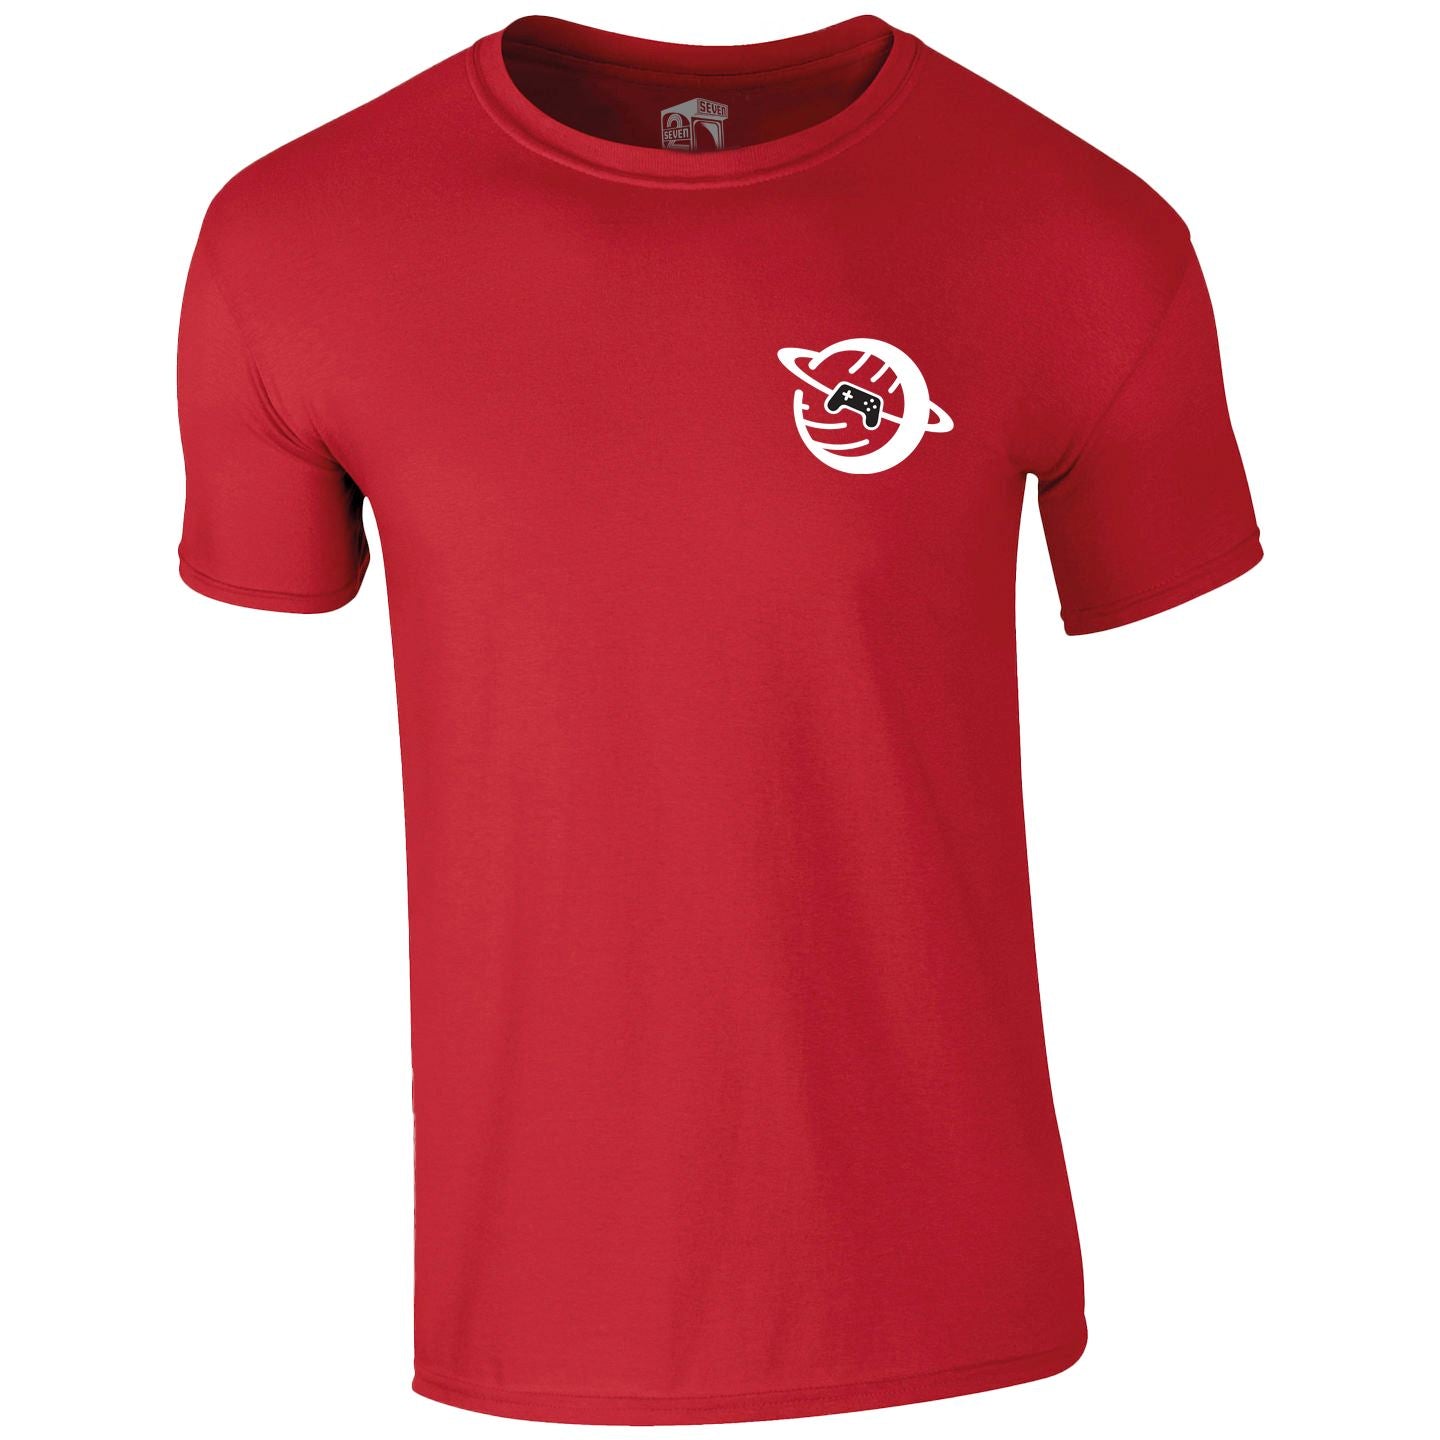 SIOW Official Charity T-Shirt RED/WHITE T-Shirt Seven Squared Small 34-36" Red/White 